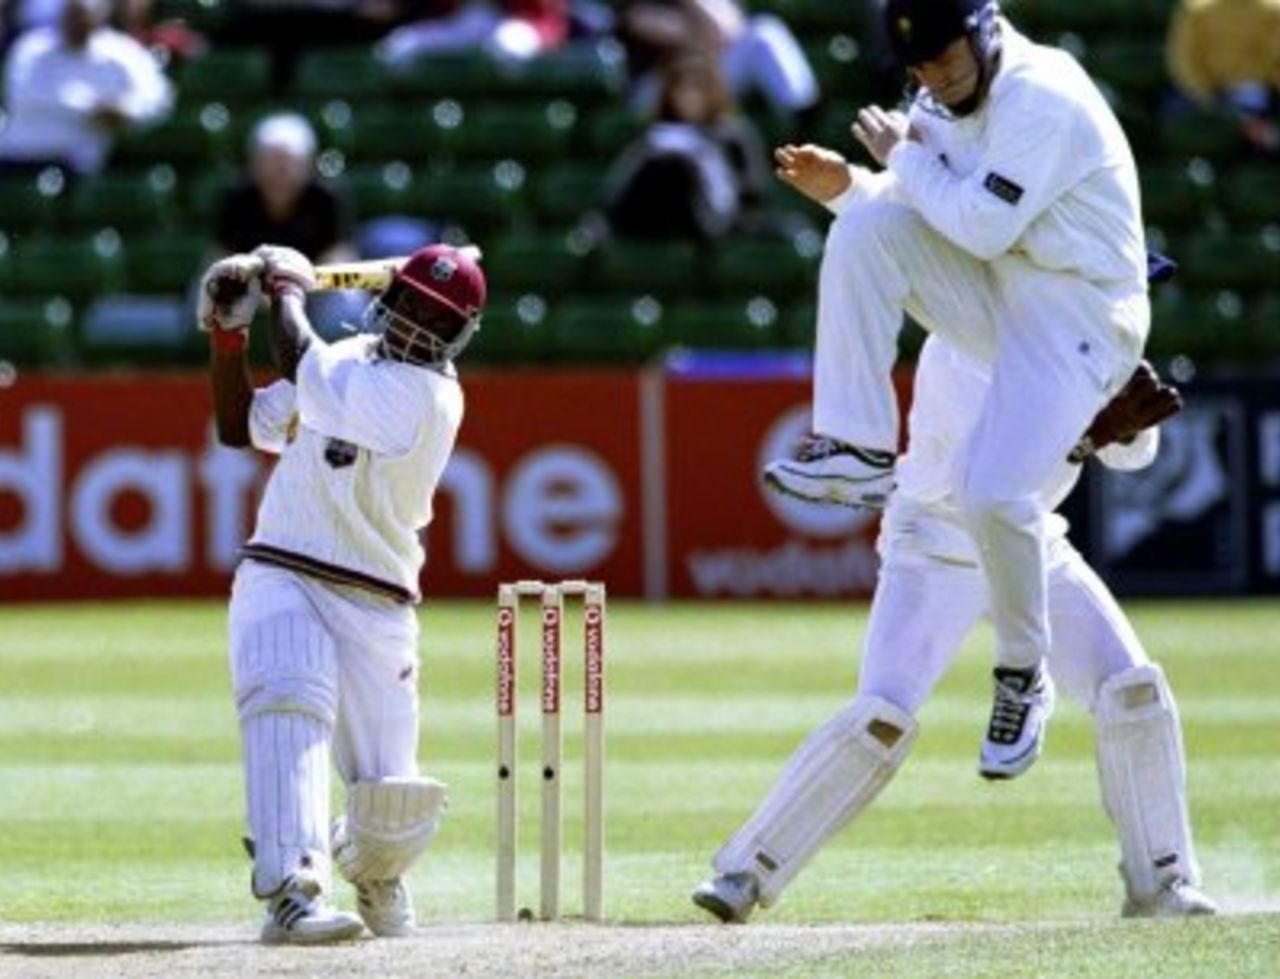 6 Jun 2000: Mahendra Nagamootoo batting for the West Indies with Mike Powell of Glamorgan in the air during the Vodafone Series Match between Glamorgan v West Indies played at Sophia Gardens in Cardiff.